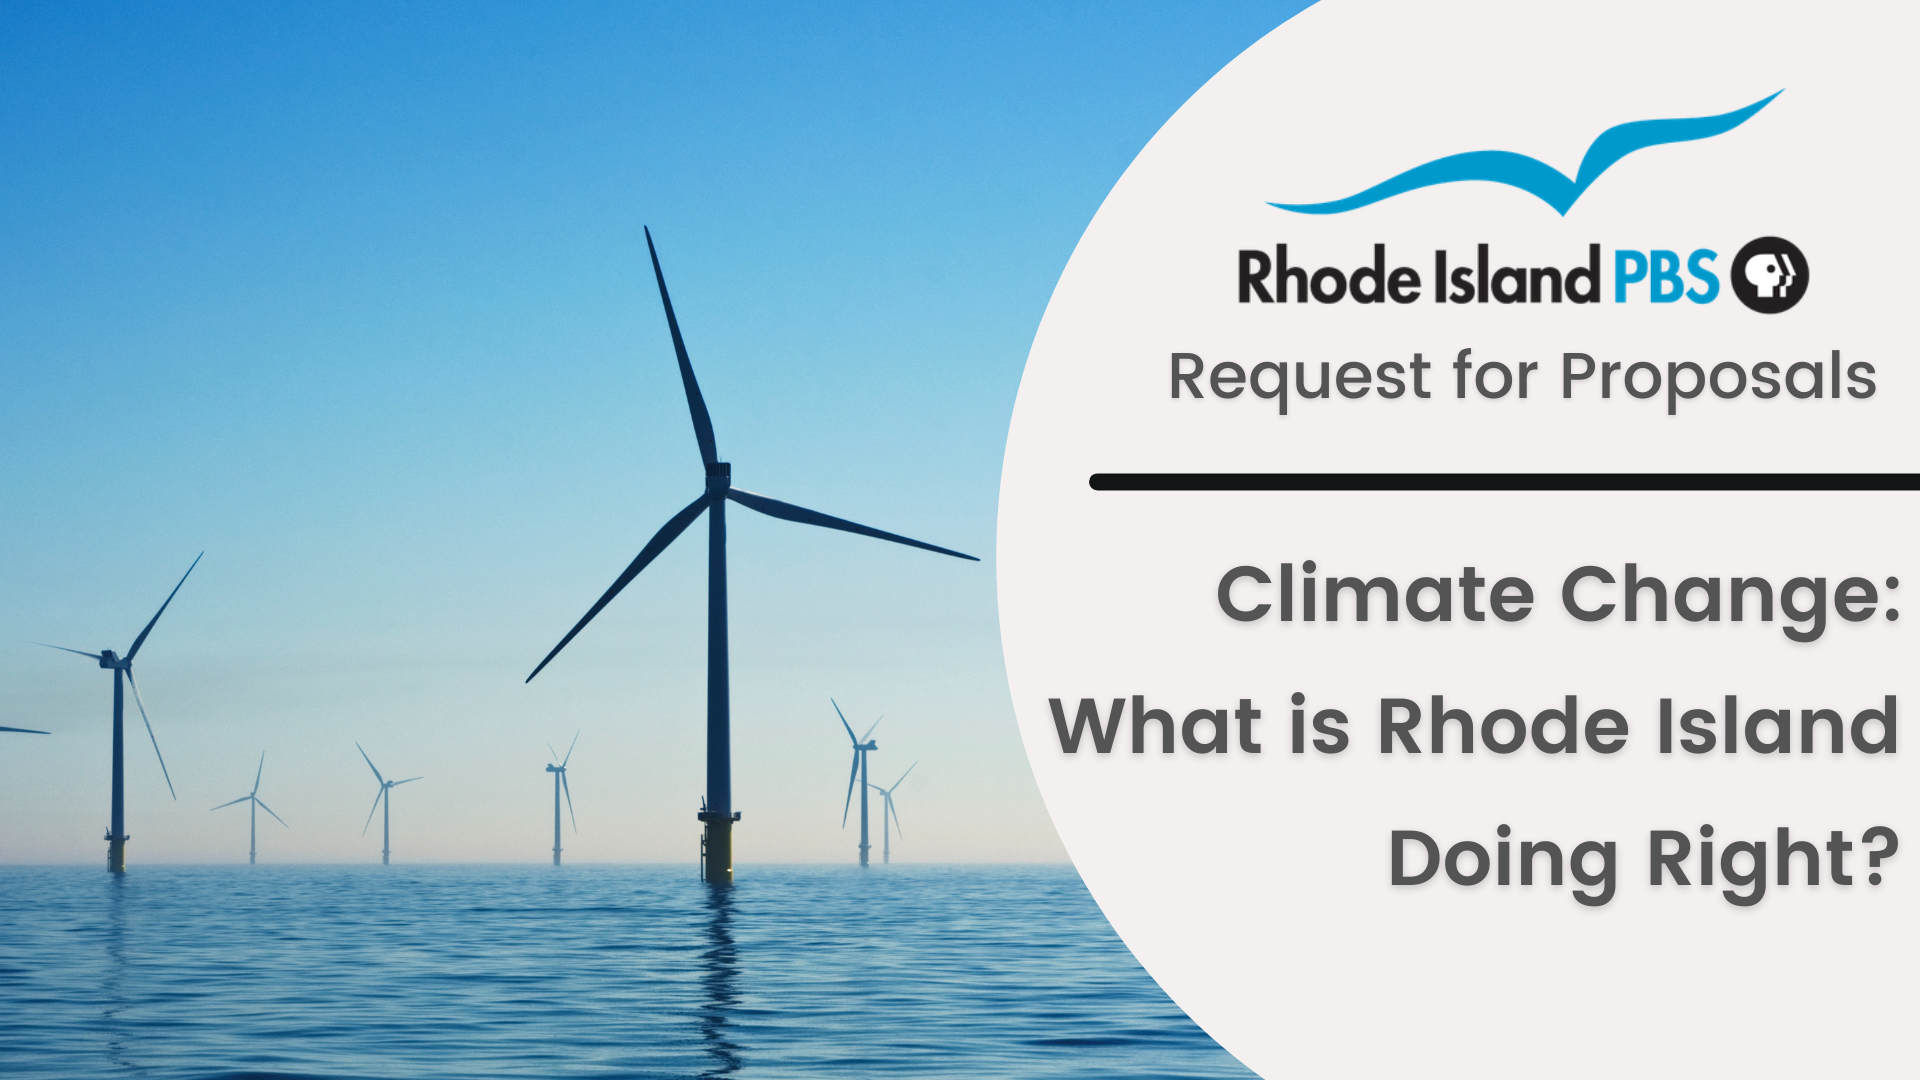 Rhode Island PBS Request for Proposals